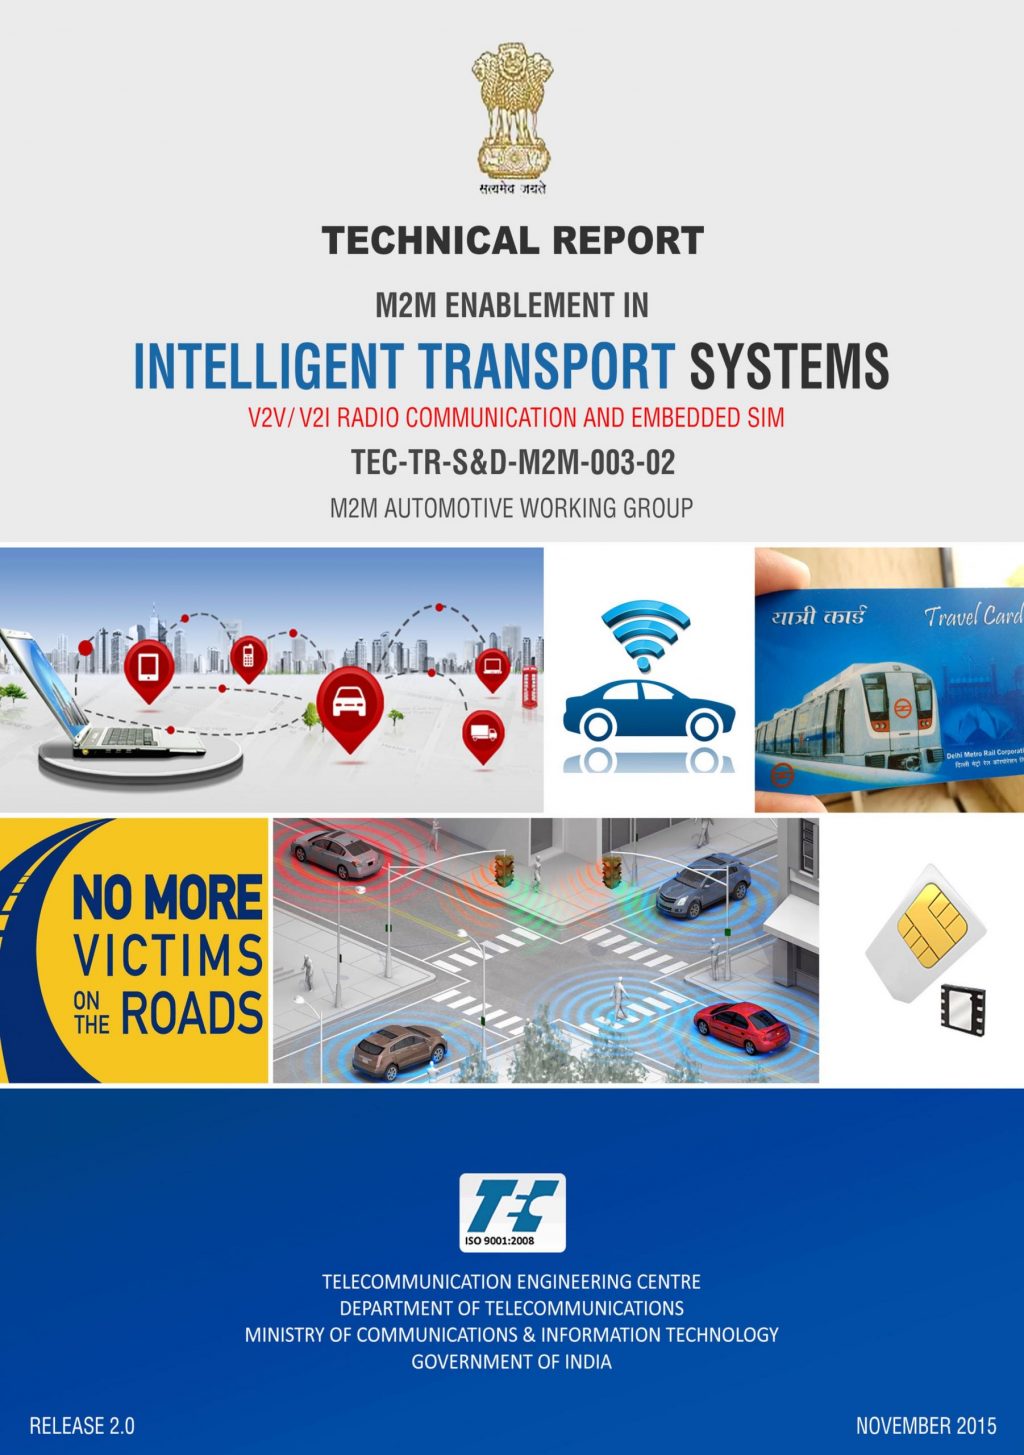 Technical report on Intelligent transport systems